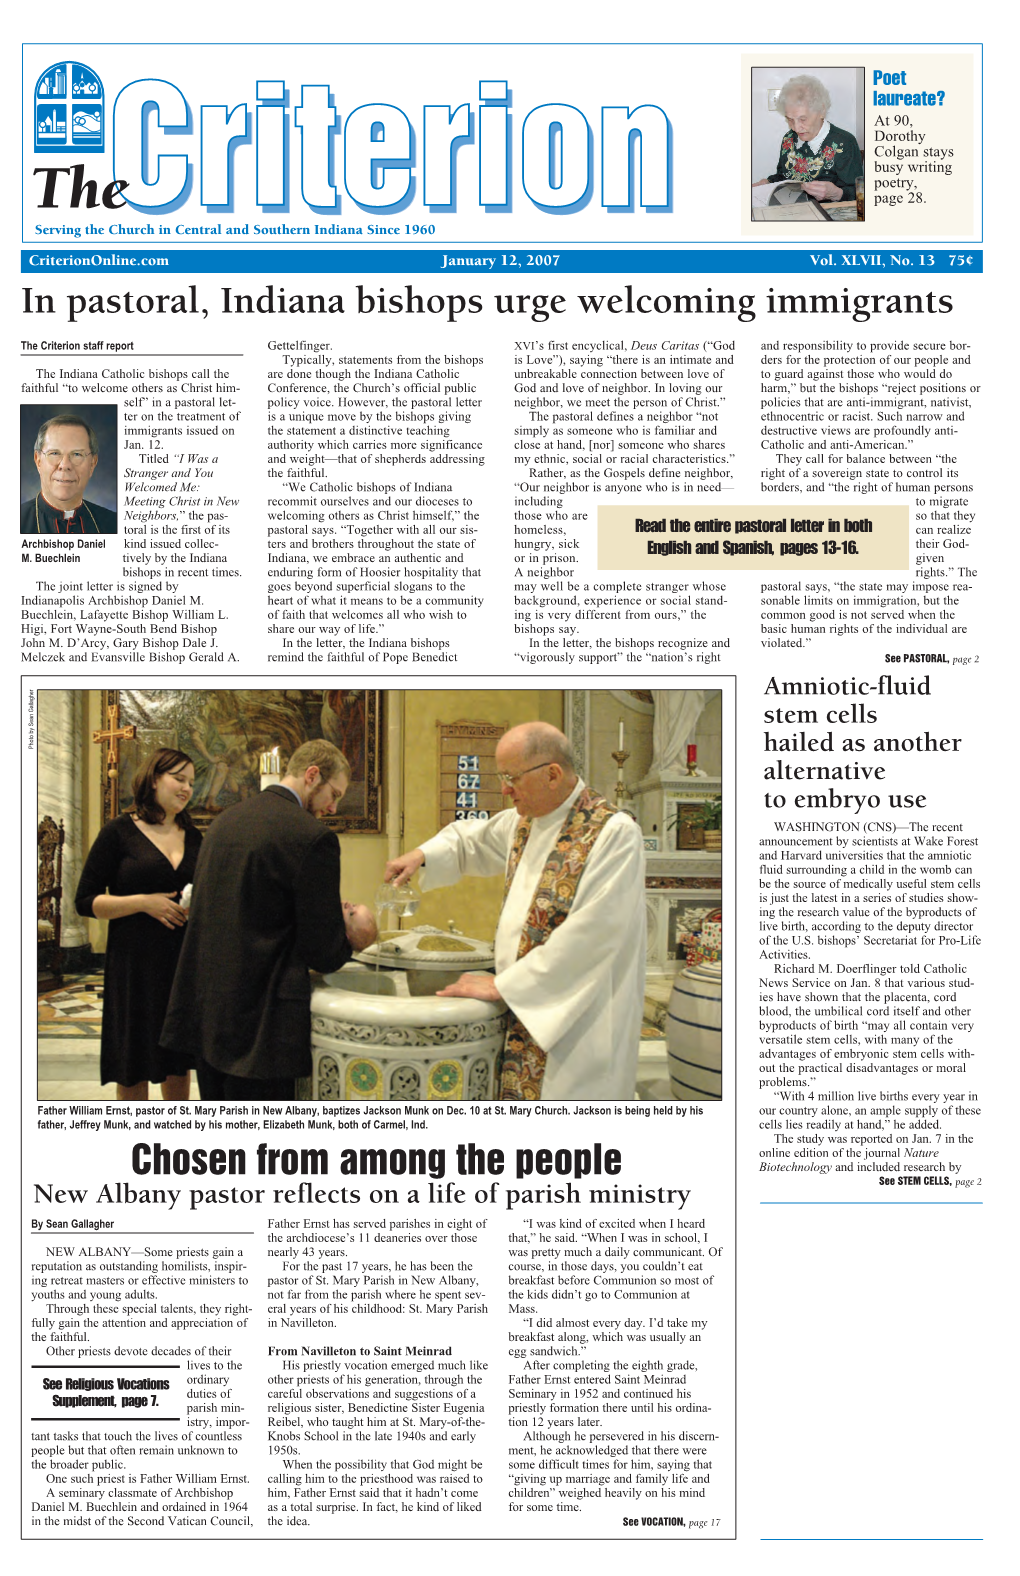 In Pastoral, Indiana Bishops Urge Welcoming Immigrants Chosen From